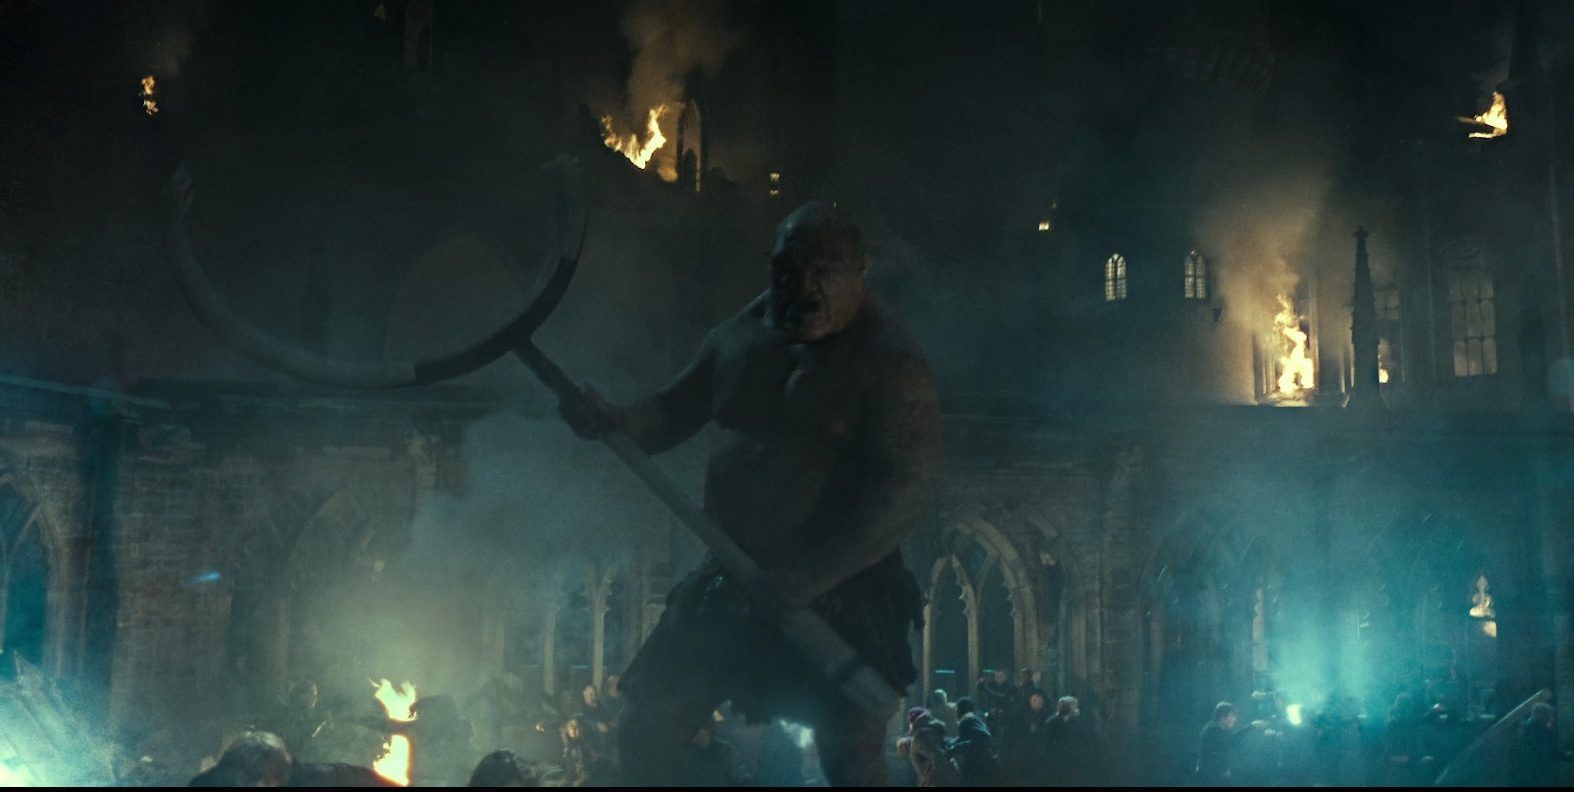 Giant At The Battle of Hogwarts